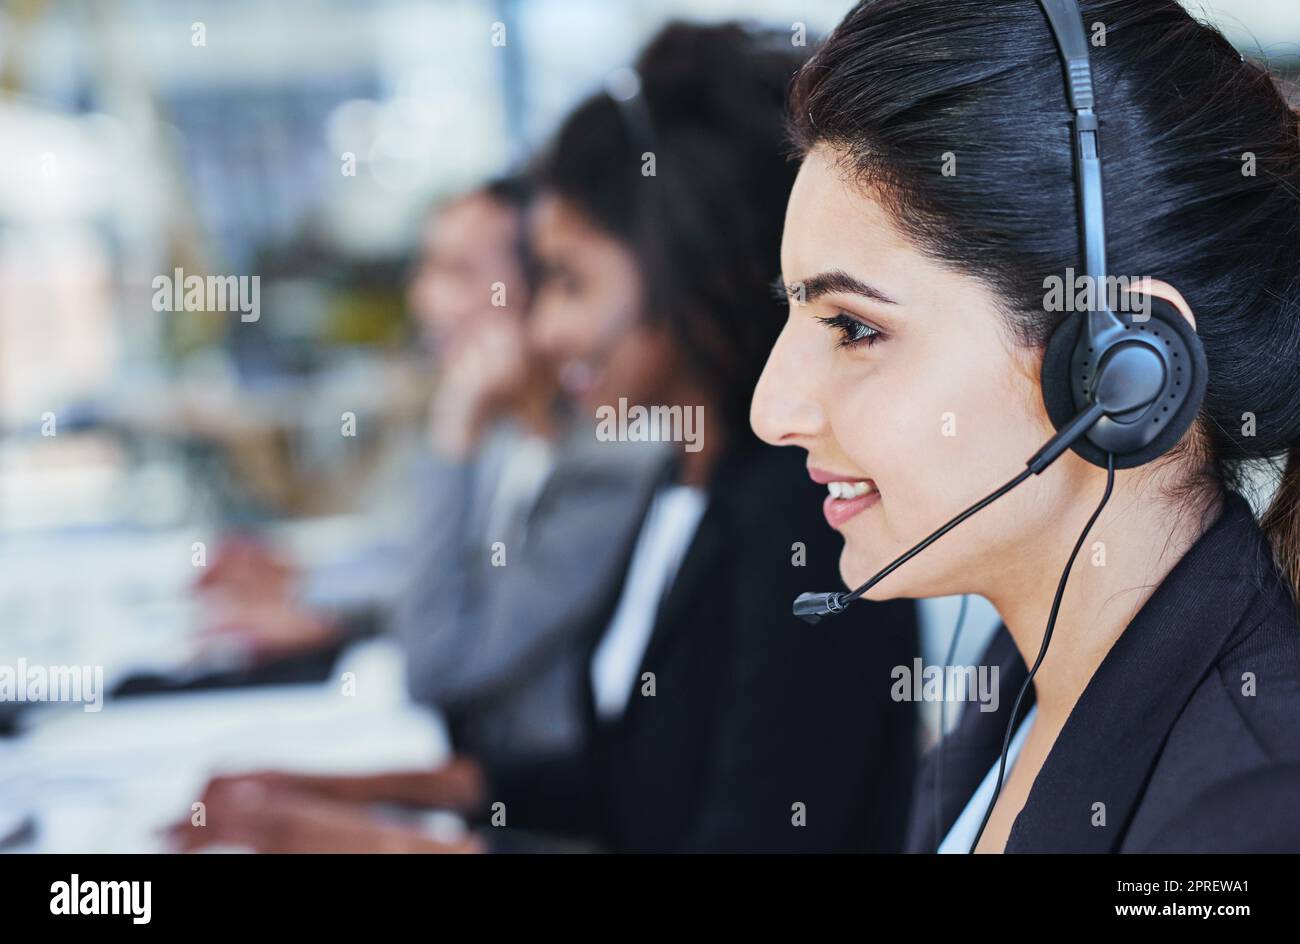 Youve reached our customer care, how may I assist. a young woman working in a call centre. Stock Photo